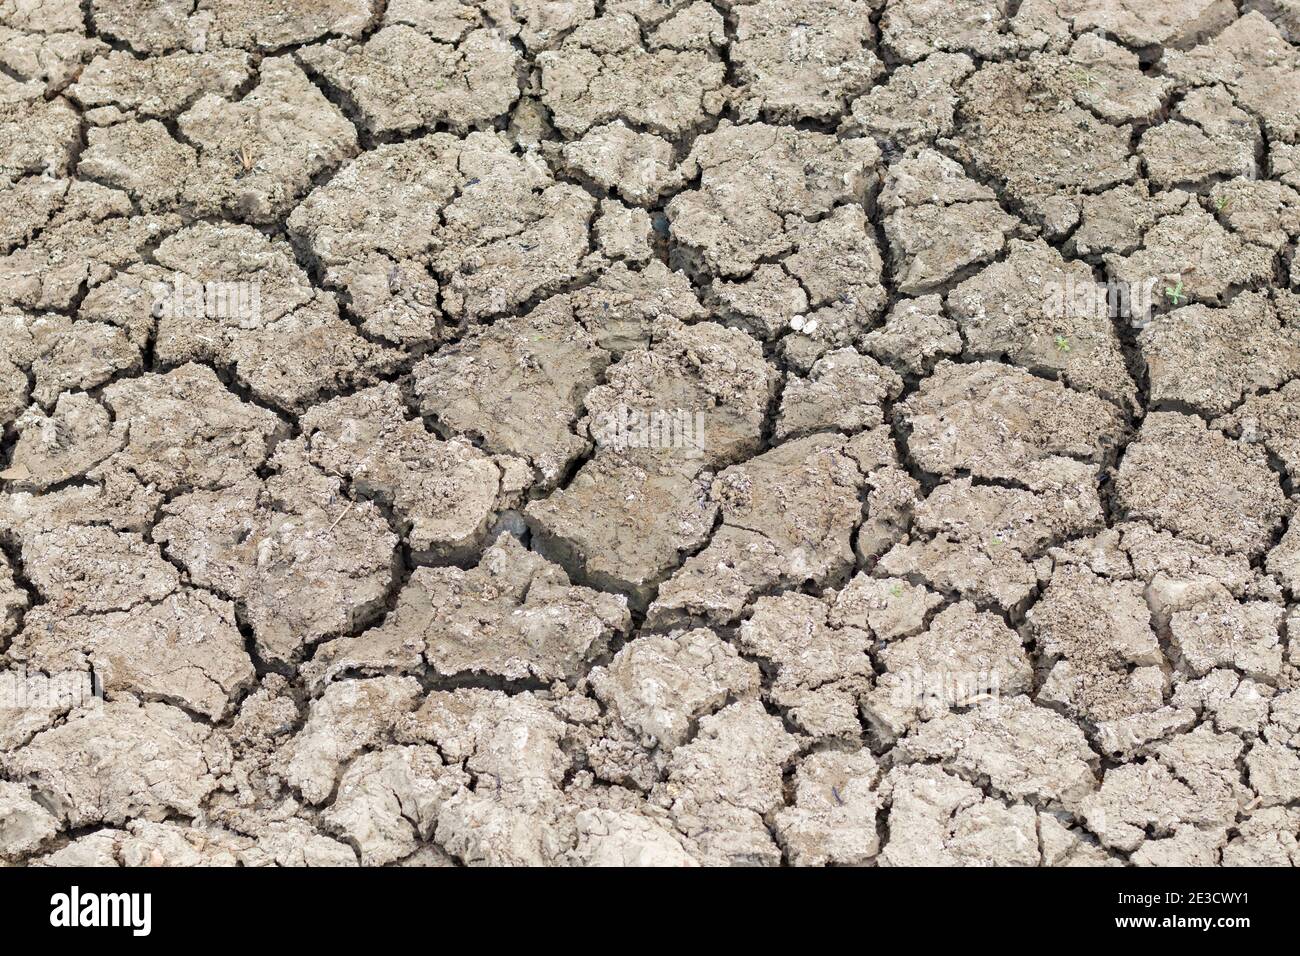 Cracked soil due to no rainfall and dry climate or drought. Stock Photo